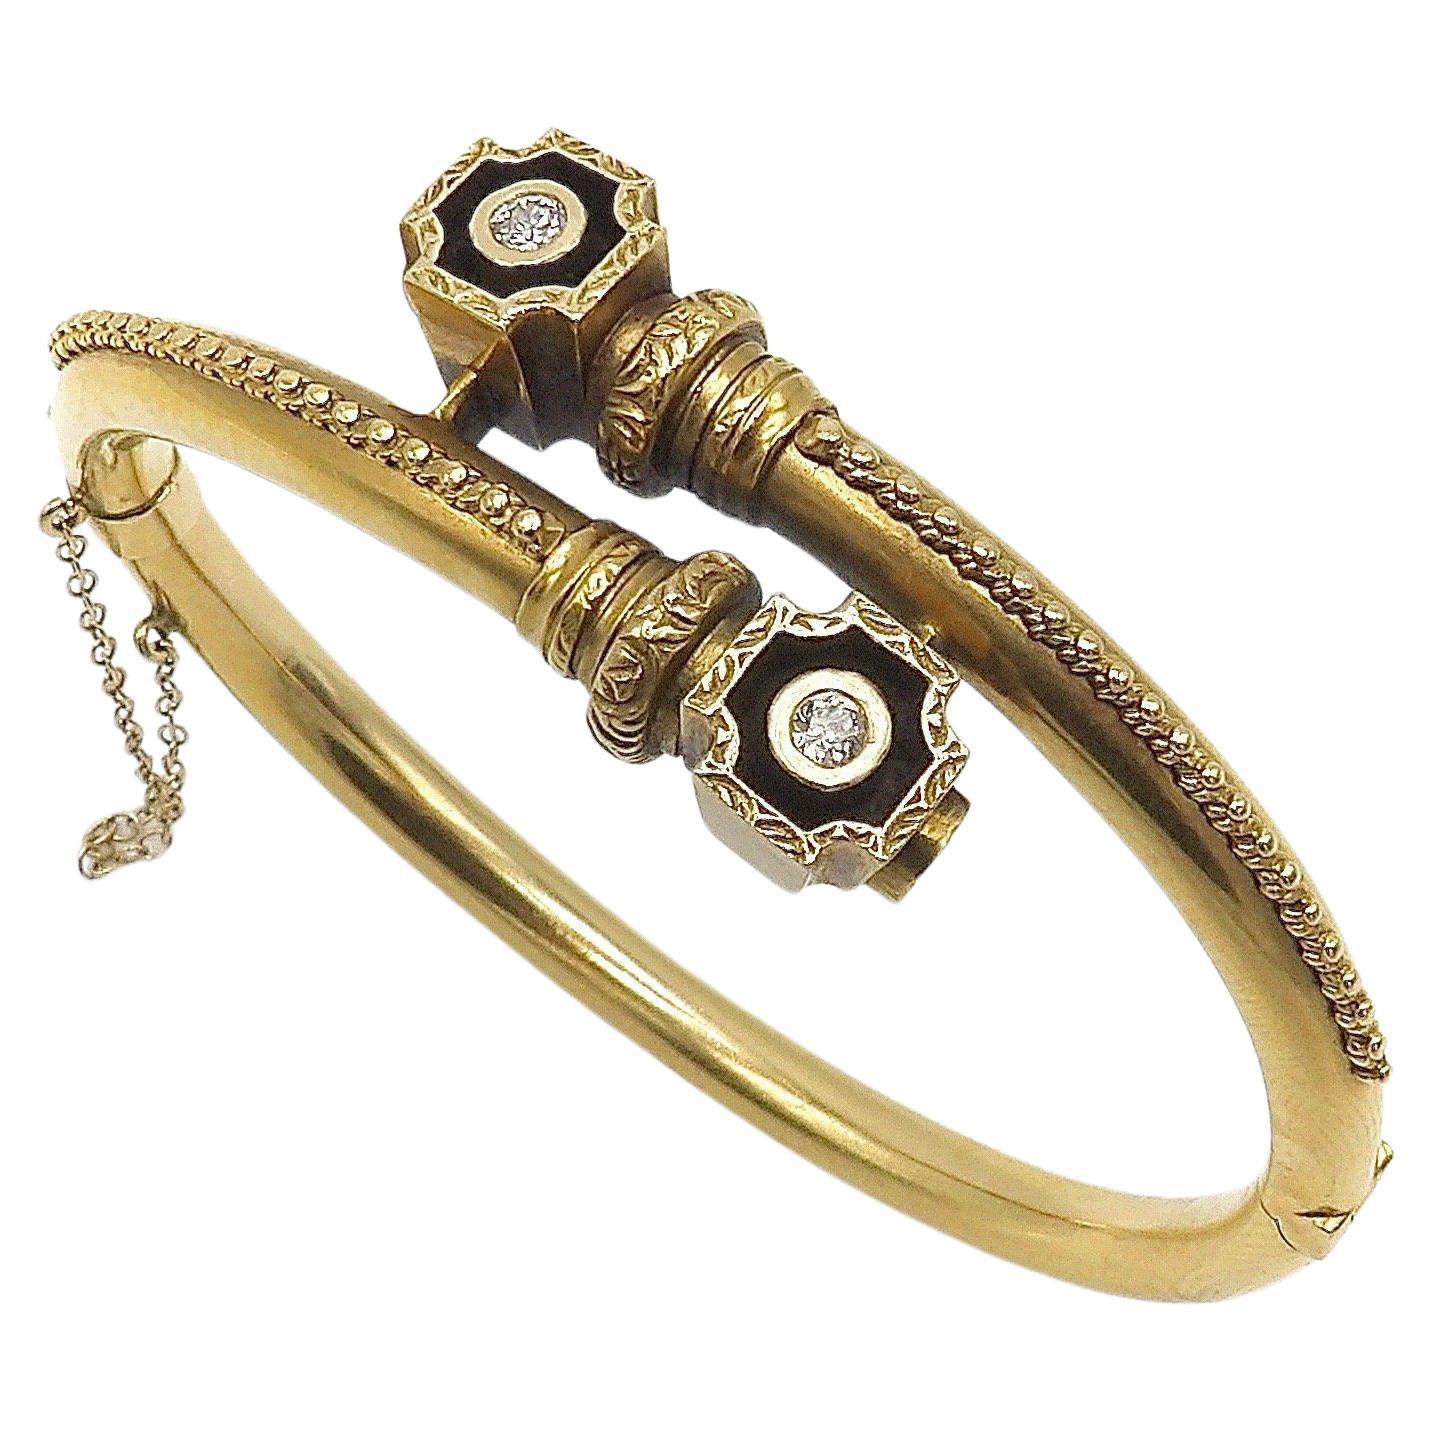 Etruscan Revival 14K Gold Bypass Bracelet with Diamonds For Sale